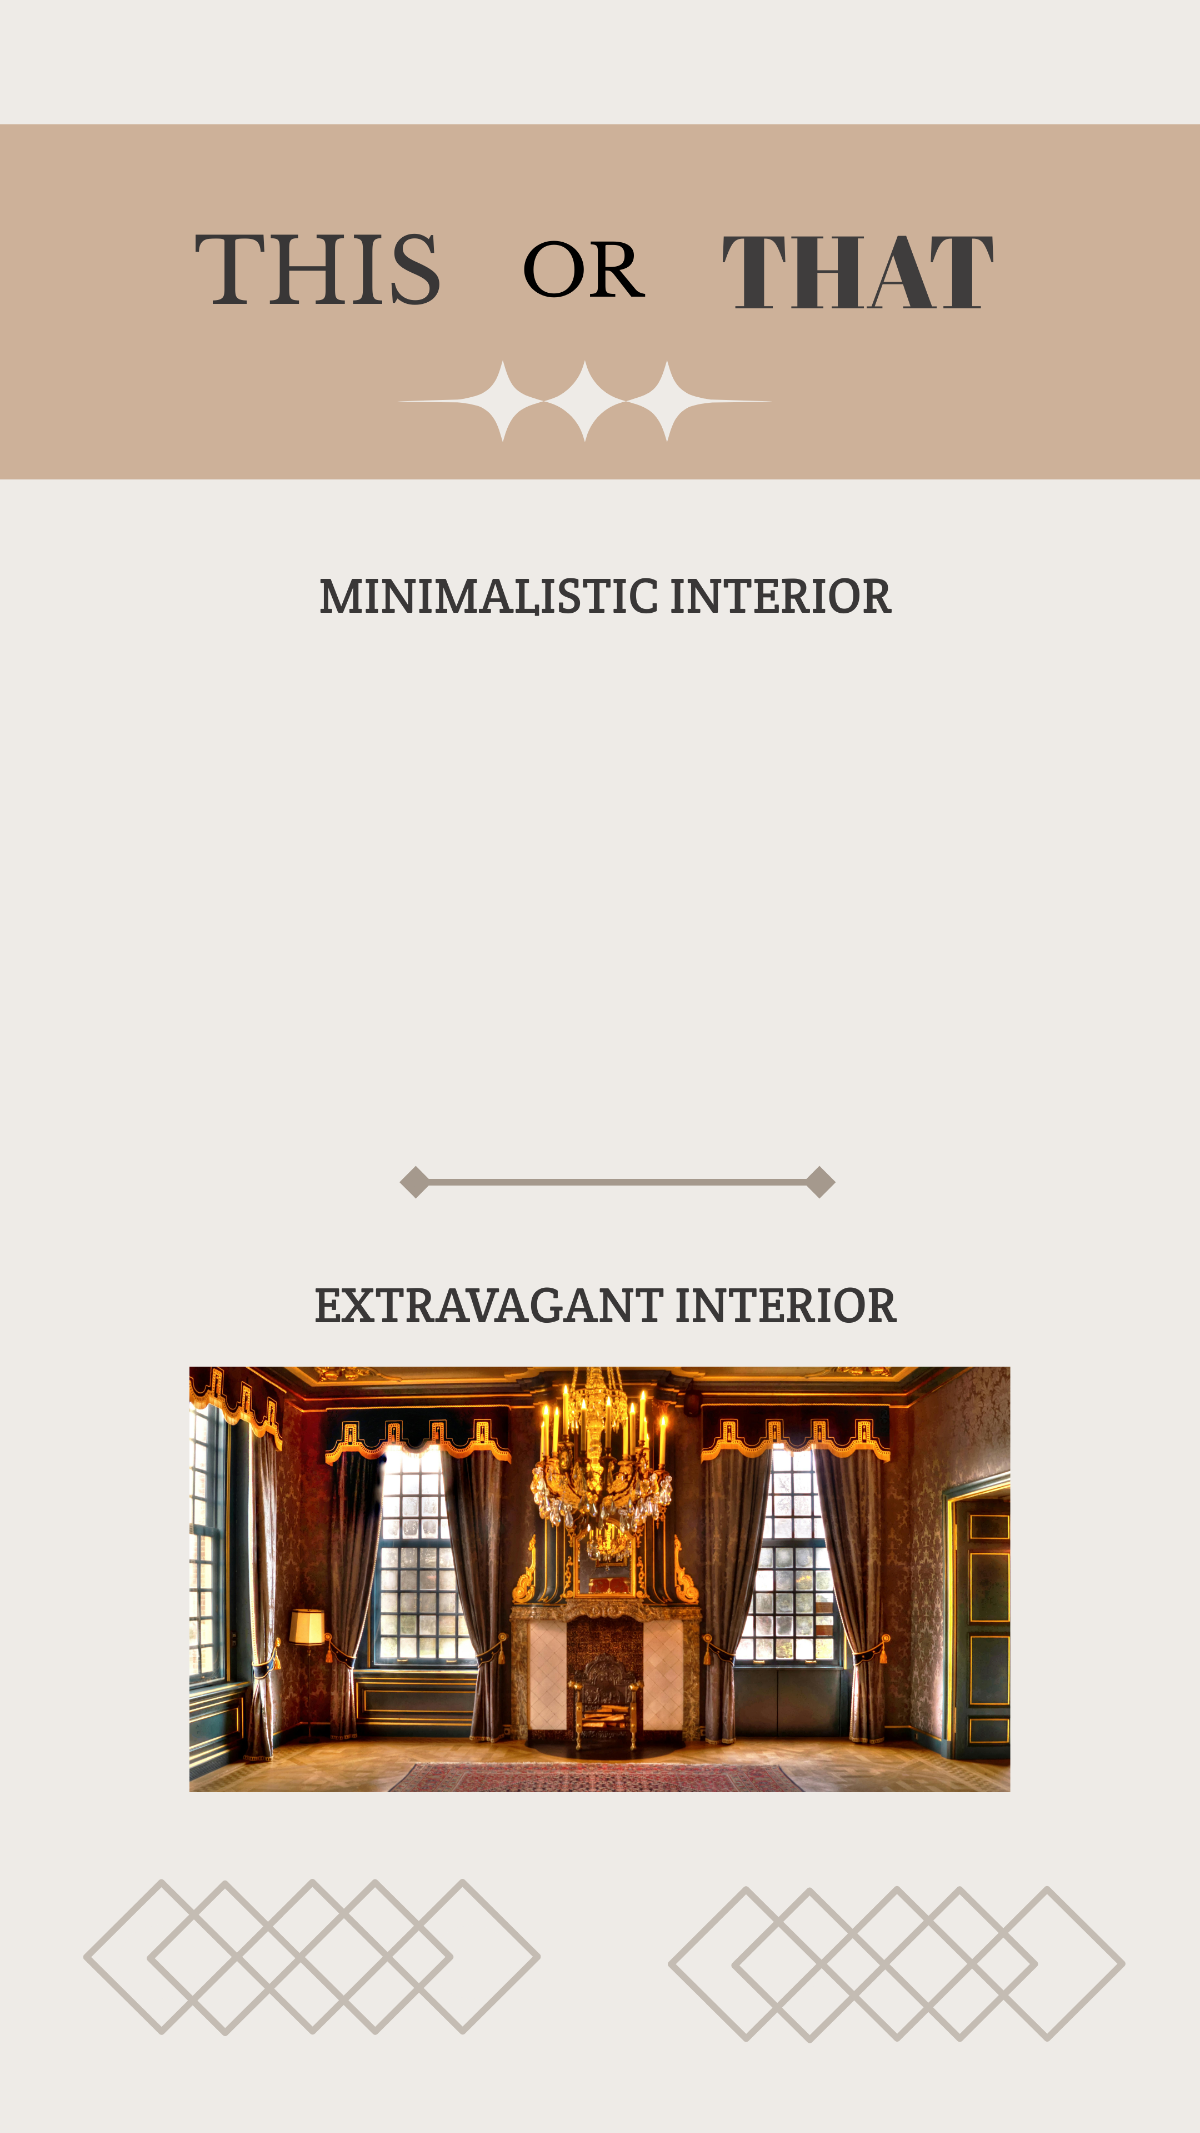 This or That Interior Story Template